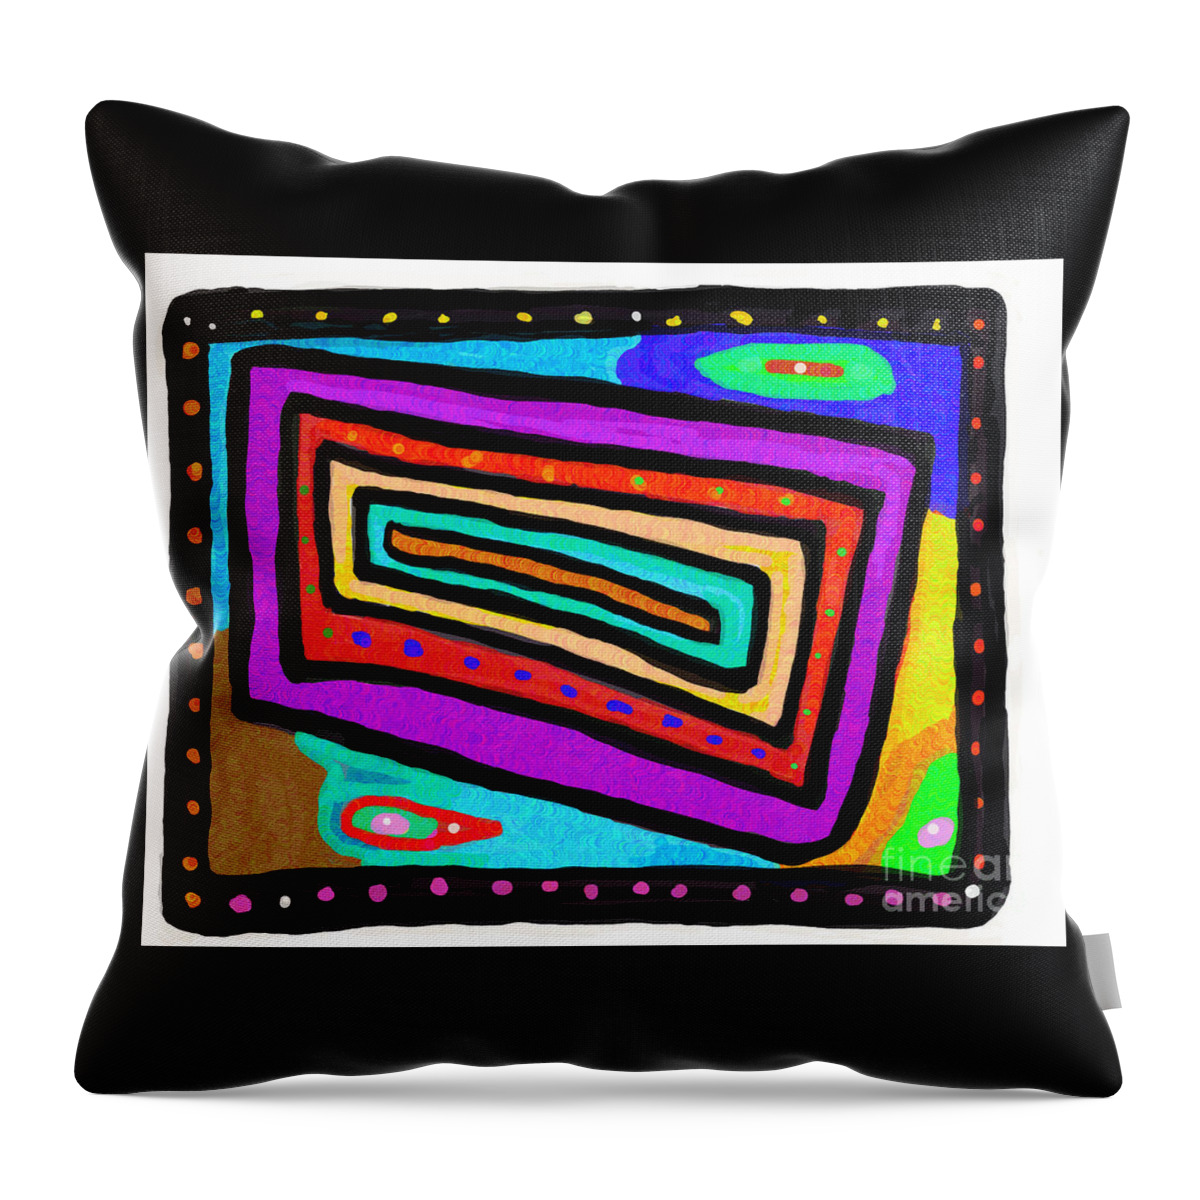 Primitive Impressionistic Expressionism Throw Pillow featuring the digital art Living Inside a Box by Zotshee Zotshee